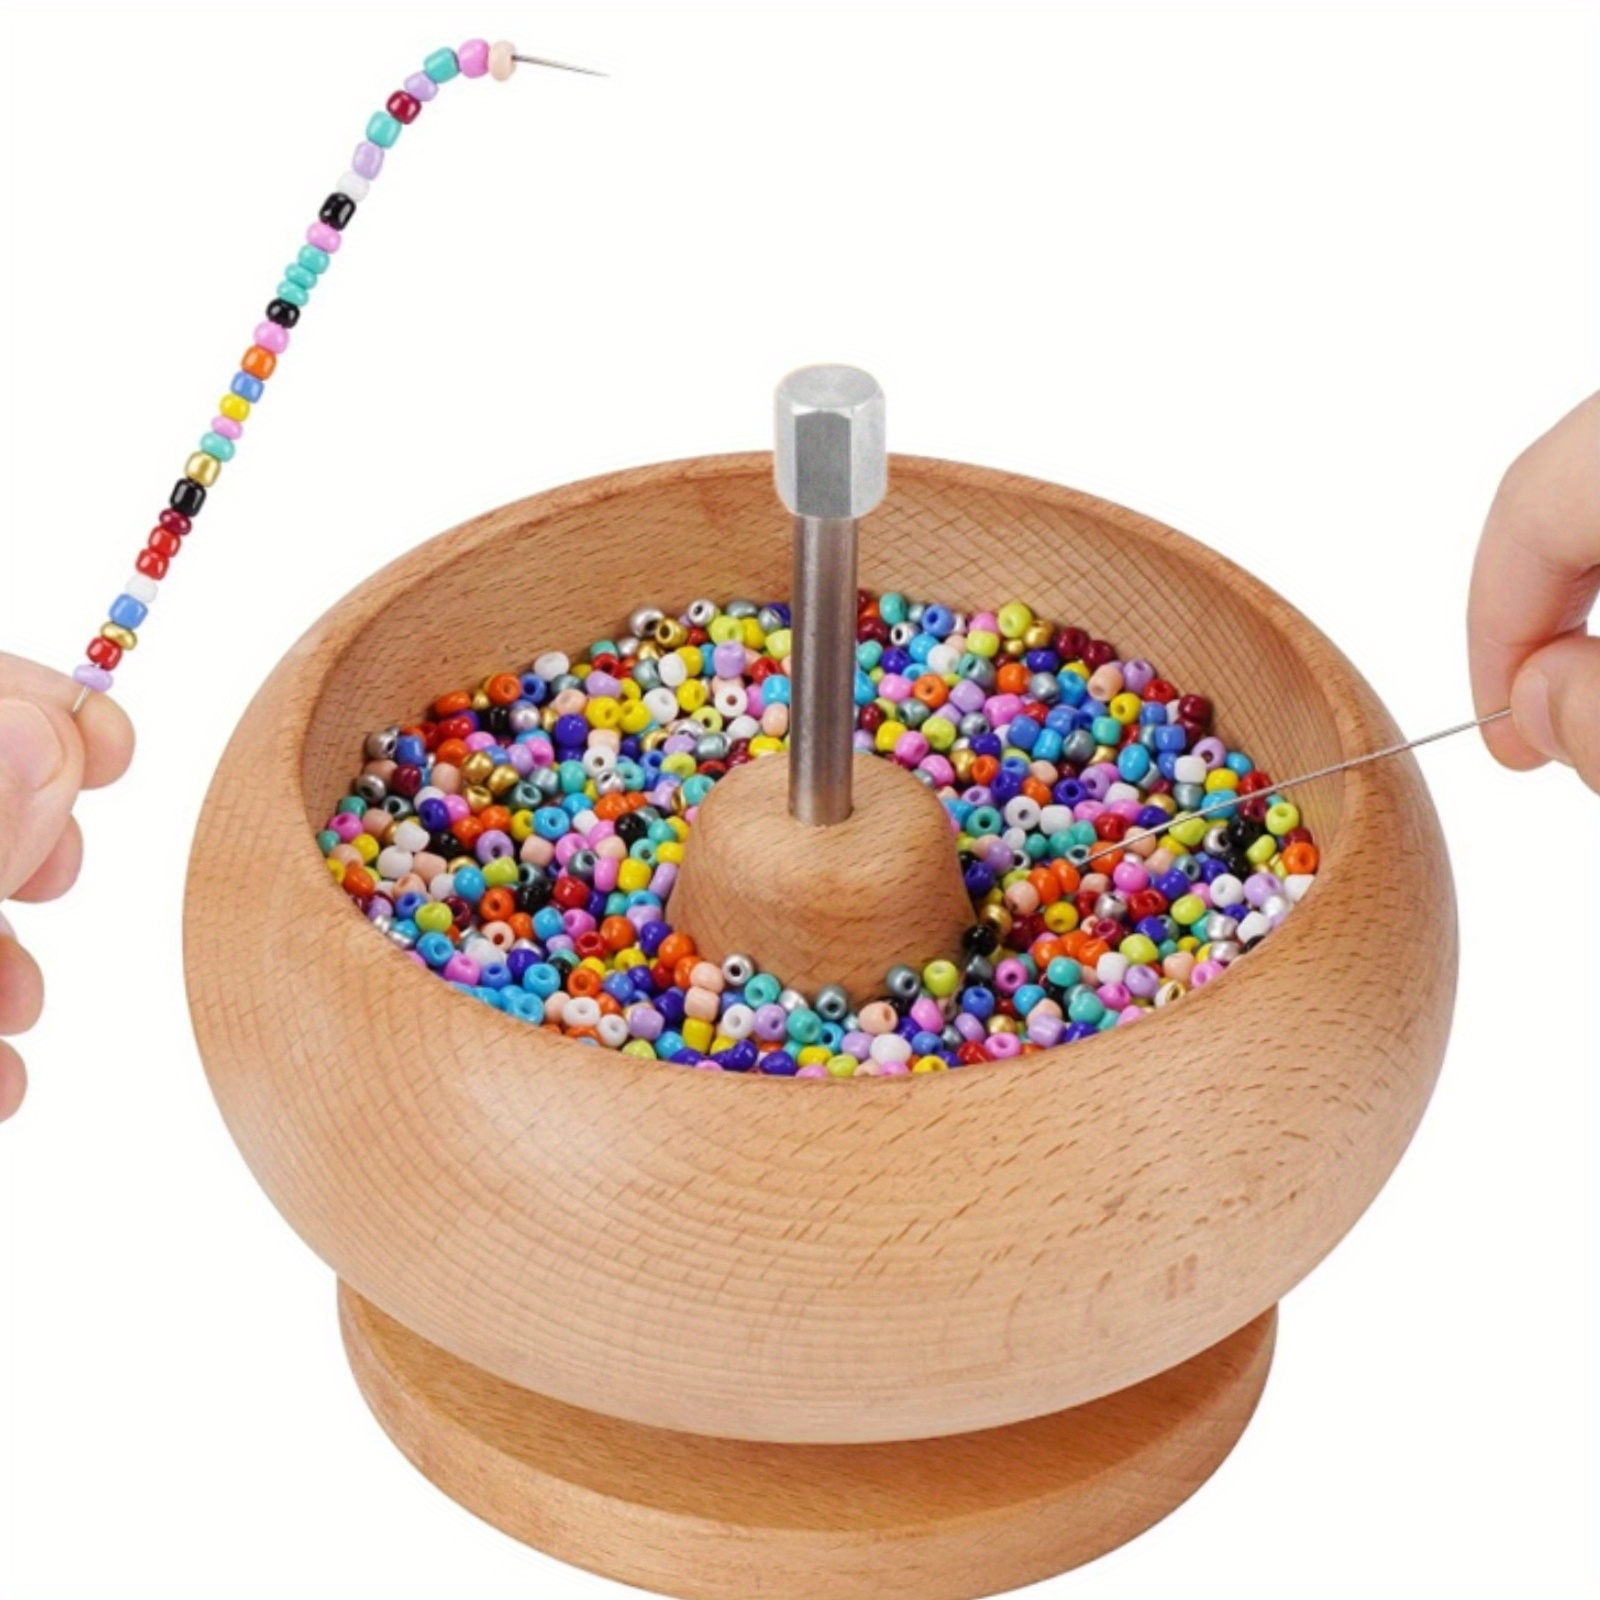 BEAD SPINNER BOWL Bead String Tool for Clay Beads Art Crafts Jewelry $15.64  - PicClick AU